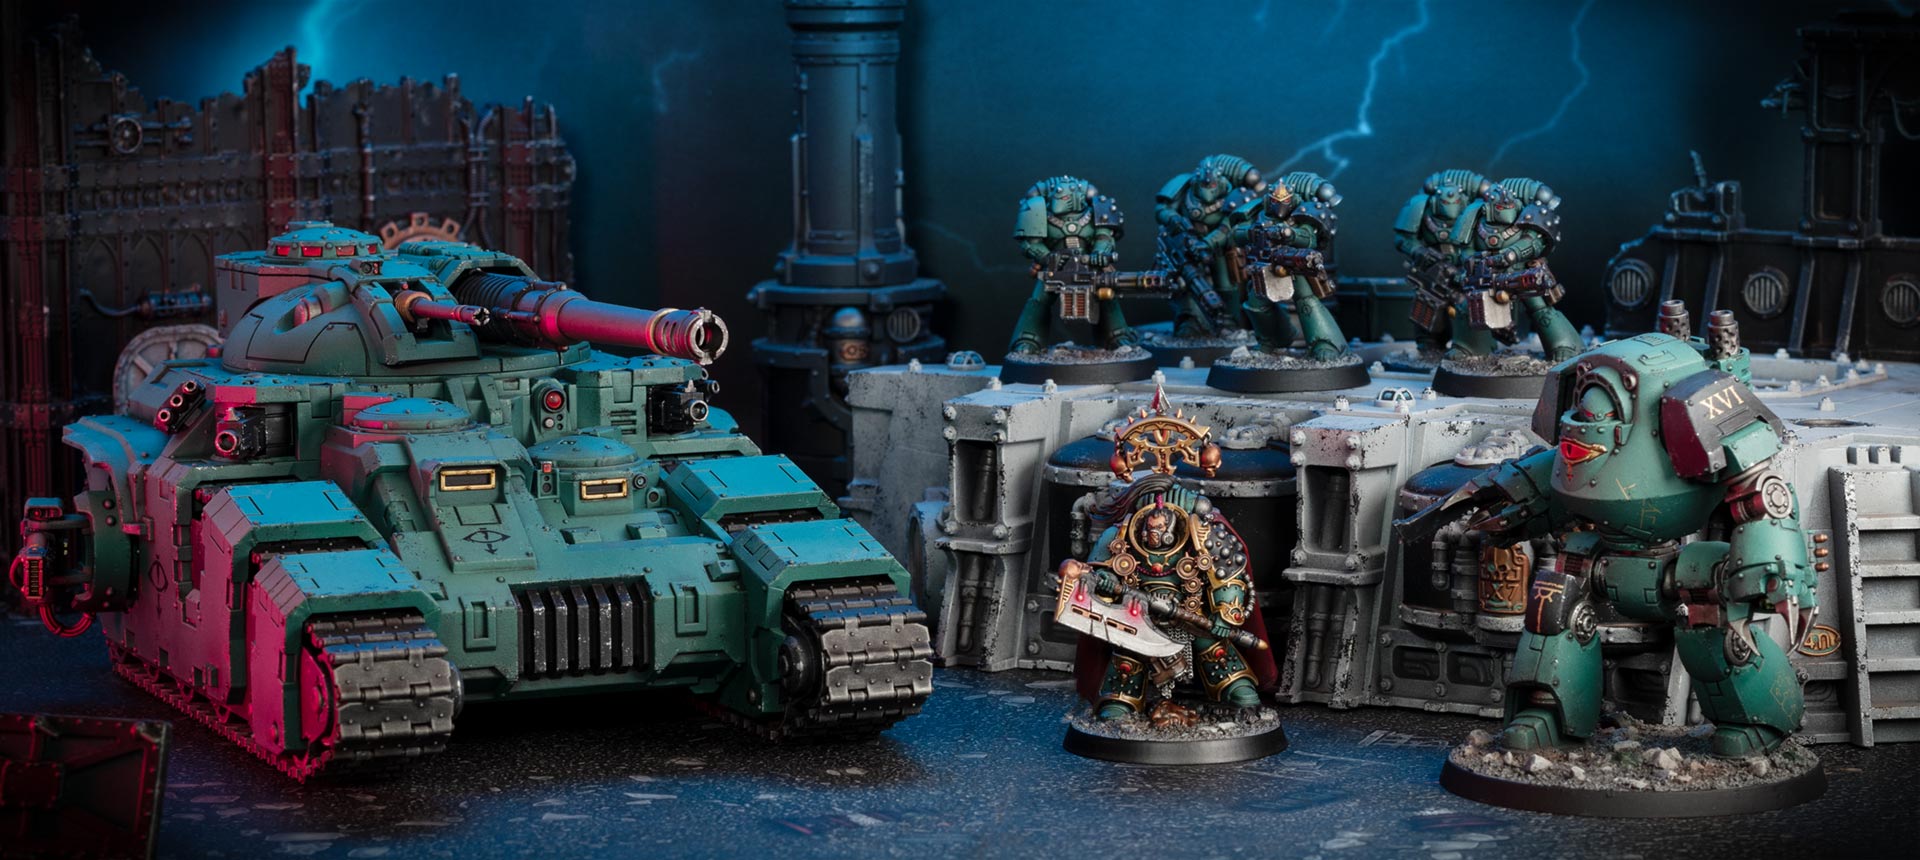 Cinematic shot of a small Sons of Horus army, consisting of a Kratos tank, Tactical Support Squad, Praetor, and Contemptor Dreadnought